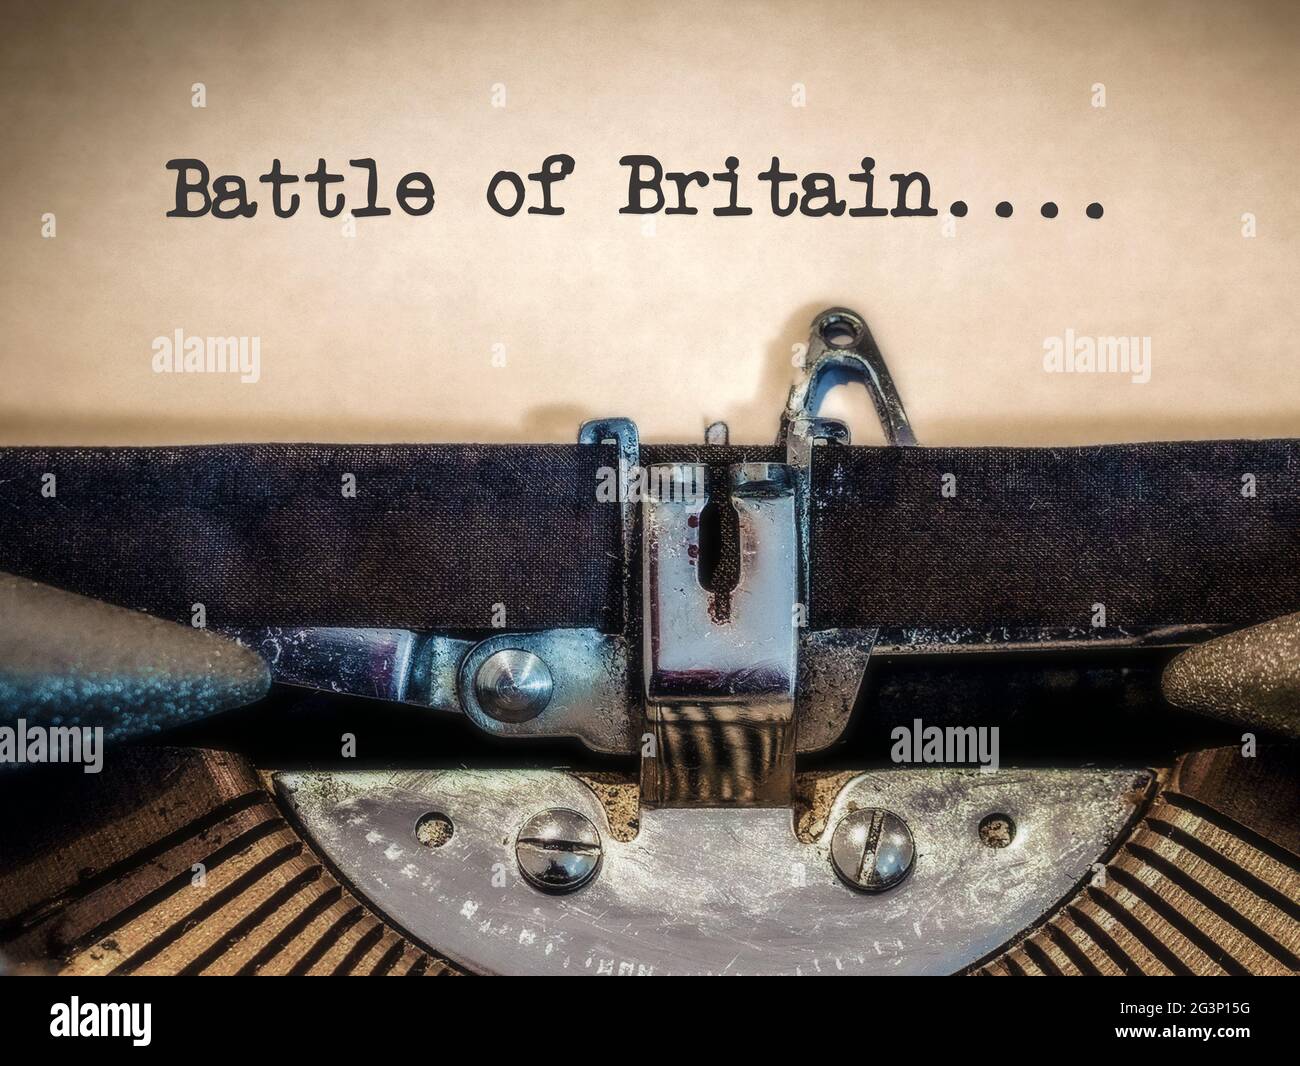 Battle of Britain printed on a classic Typewriter Stock Photo